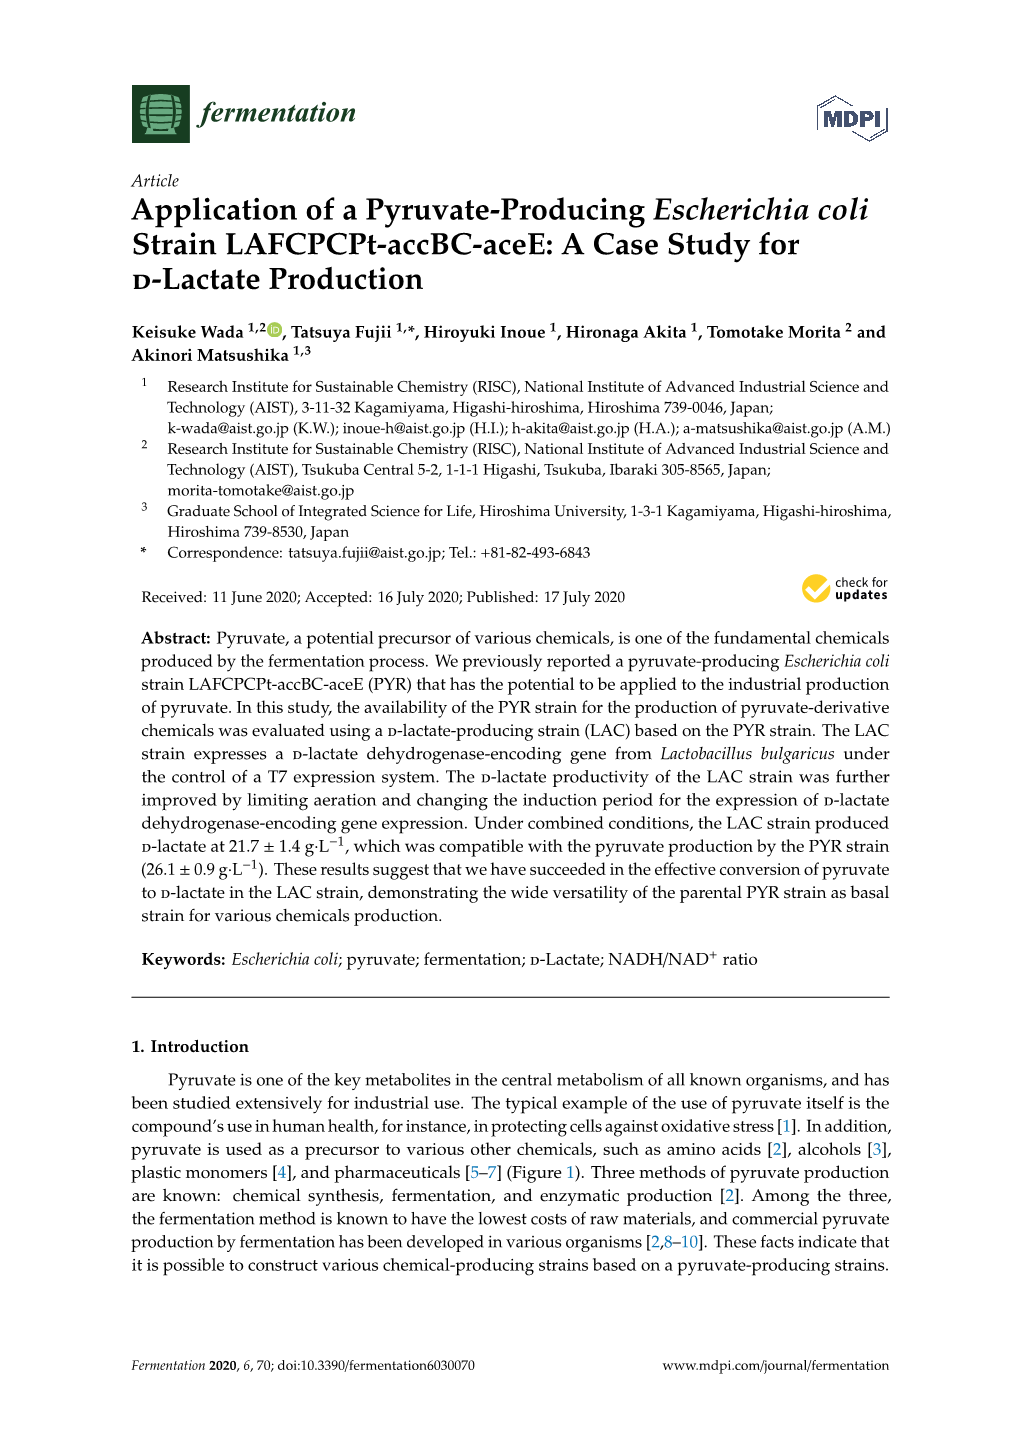 Application of a Pyruvate-Producing Escherichia Coli Strain Lafcpcpt-Accbc-Acee: a Case Study for D-Lactate Production